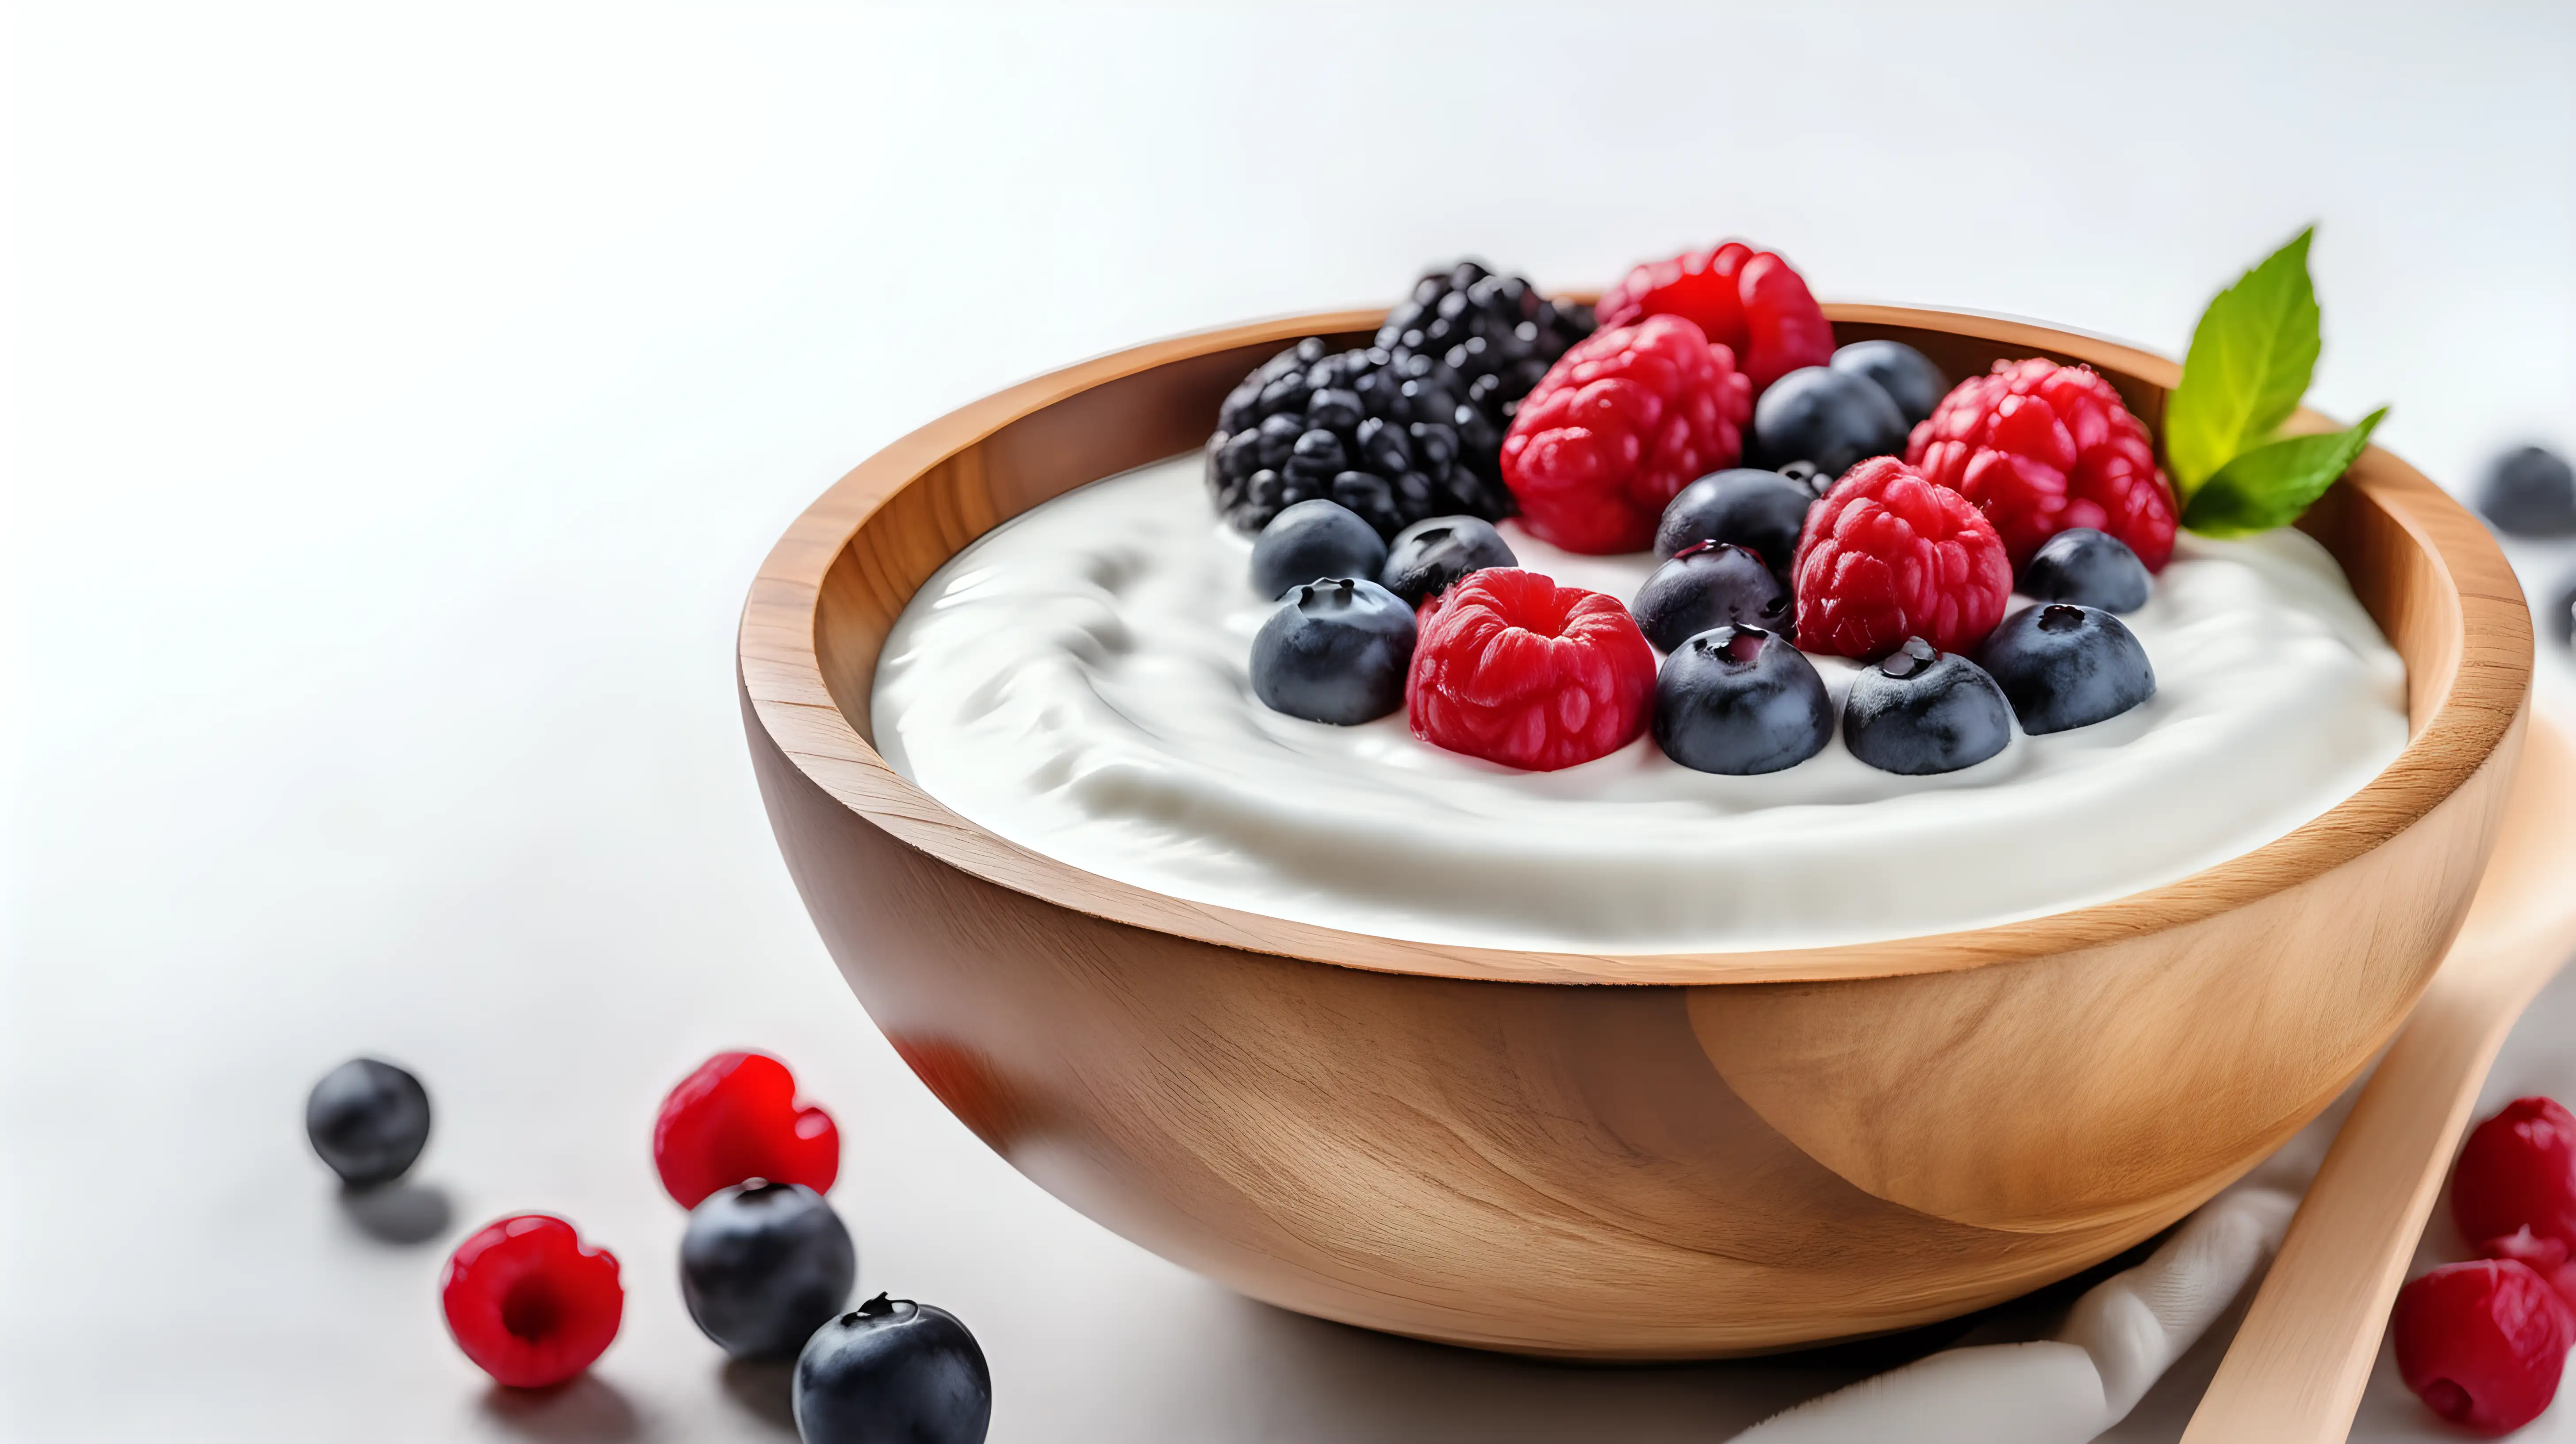 Yogurt with fruit berry in wooden bowl, white background, copy space